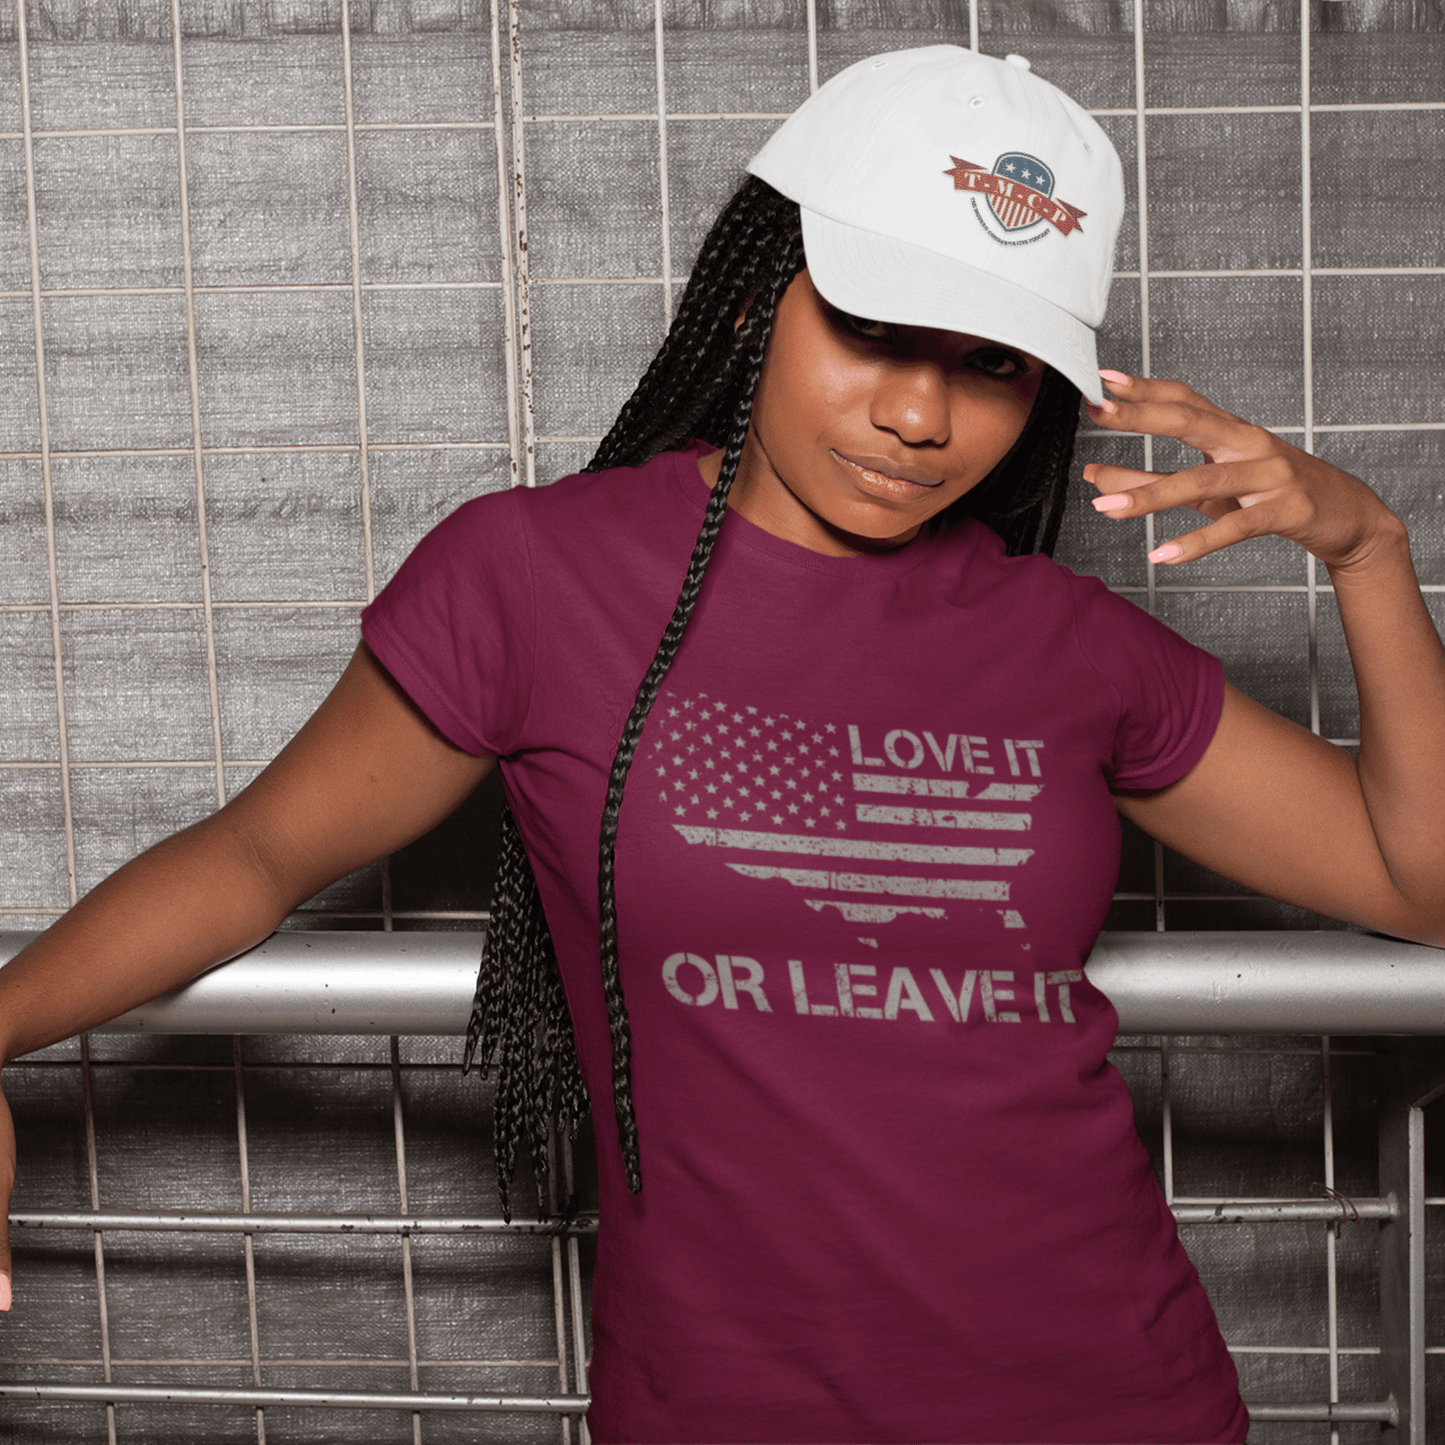 Love It Or Leave It Women's Short Sleeve T-Shirt with maroon hat front